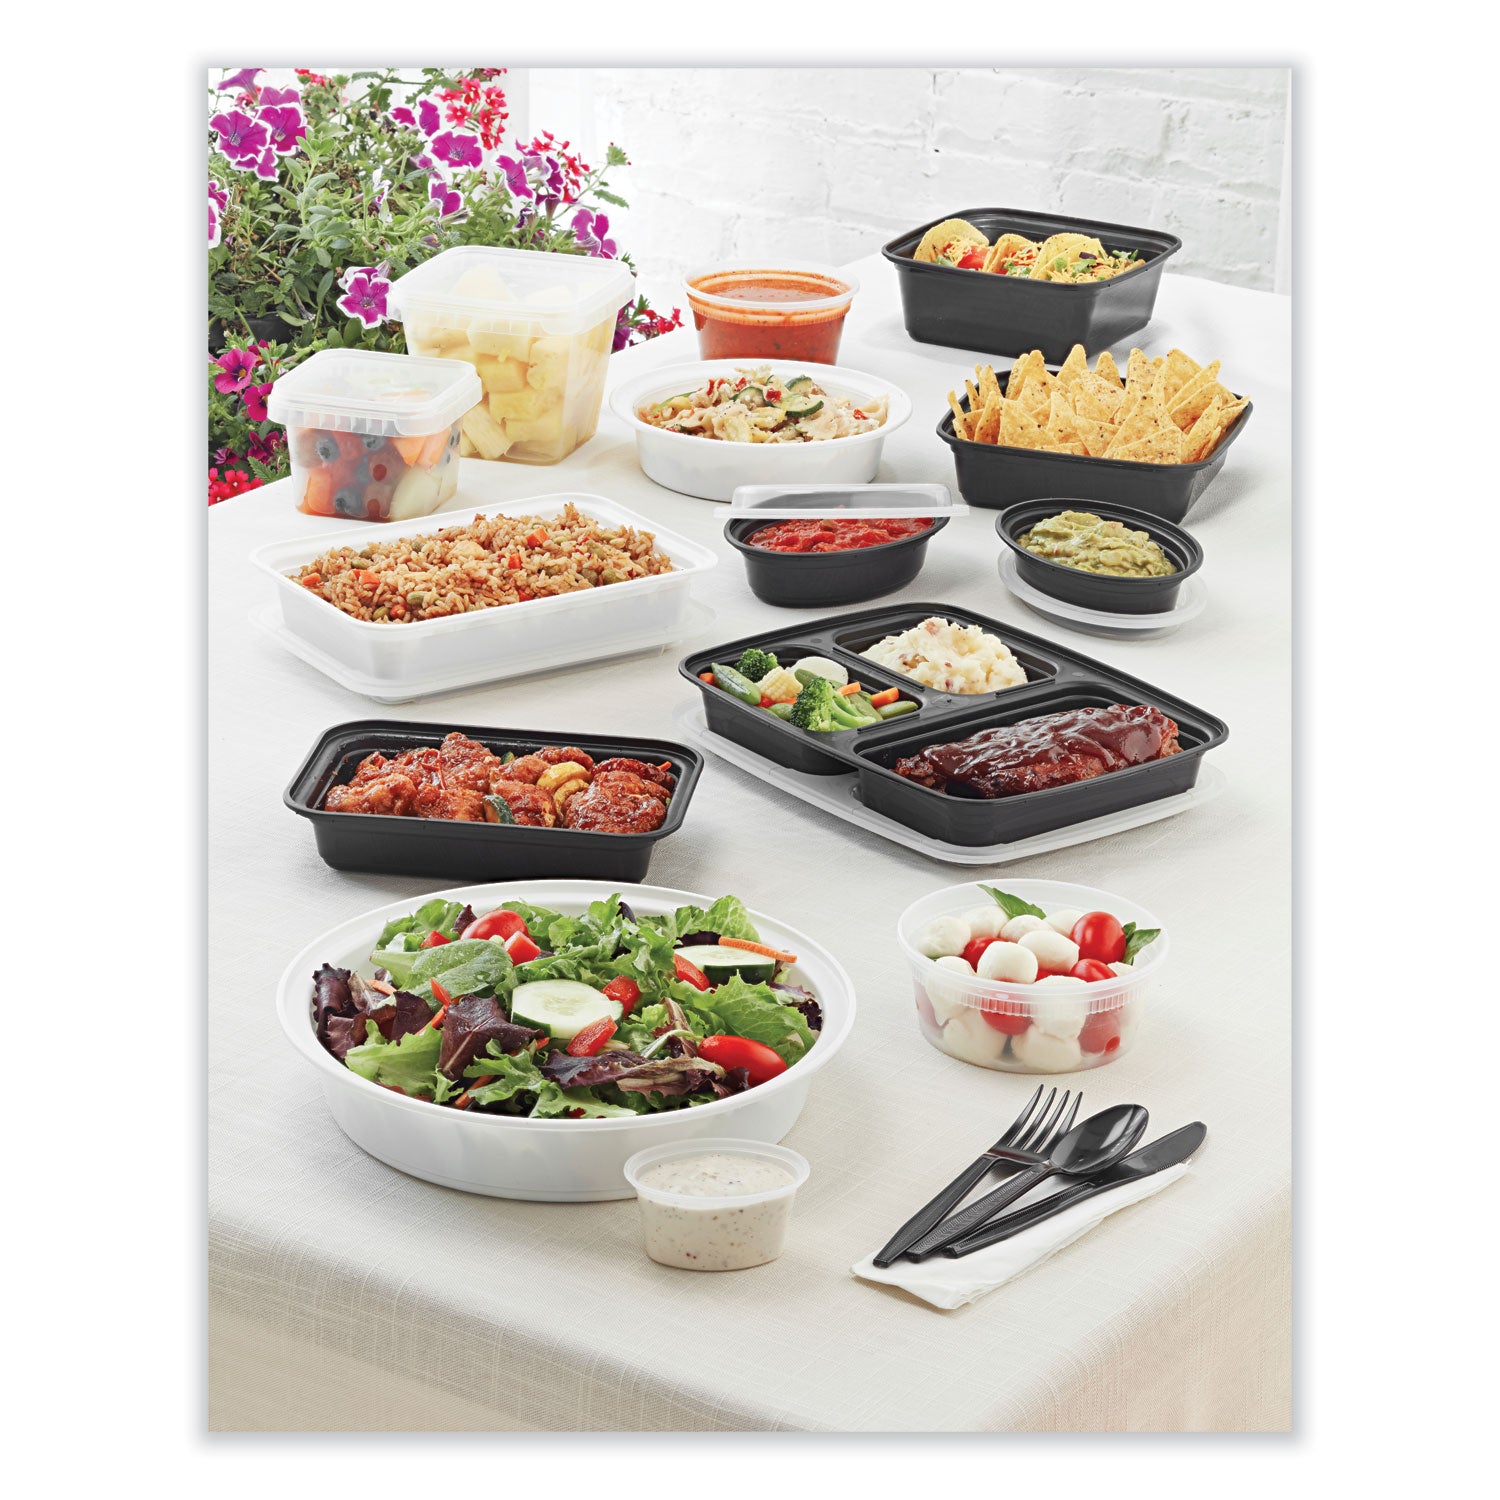 newspring-versatainer-microwavable-containers-oval-8-oz-57-x-4-x-145-black-clear-plastic-150-carton_pctoc08b - 3